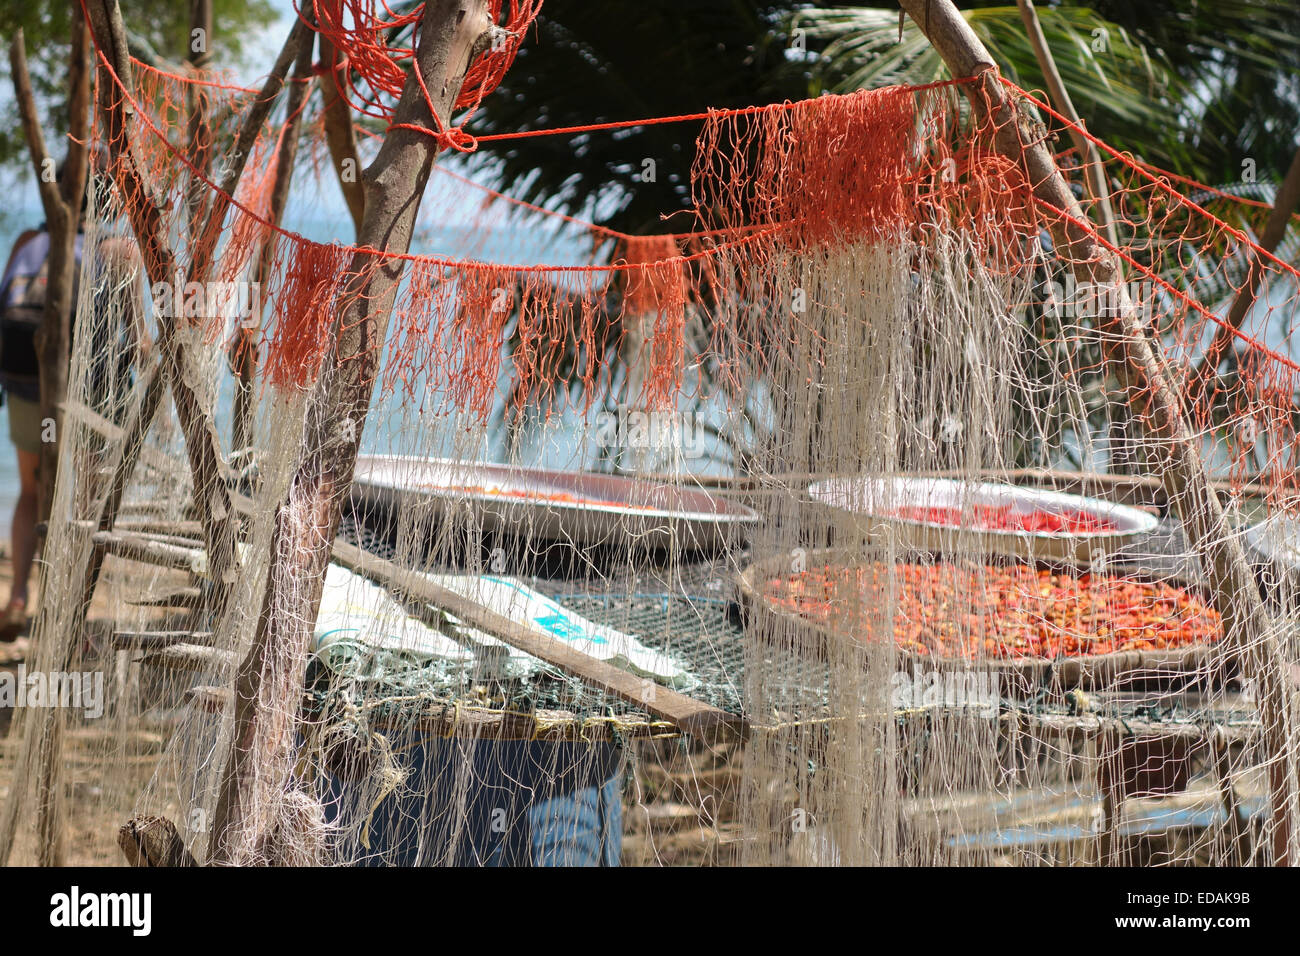 Sun dried chili peppers and dried fish on plates behind fish nets. Sea gypsies, Koh Lanta, Krabi, Thailand, South-east Asia. Stock Photo